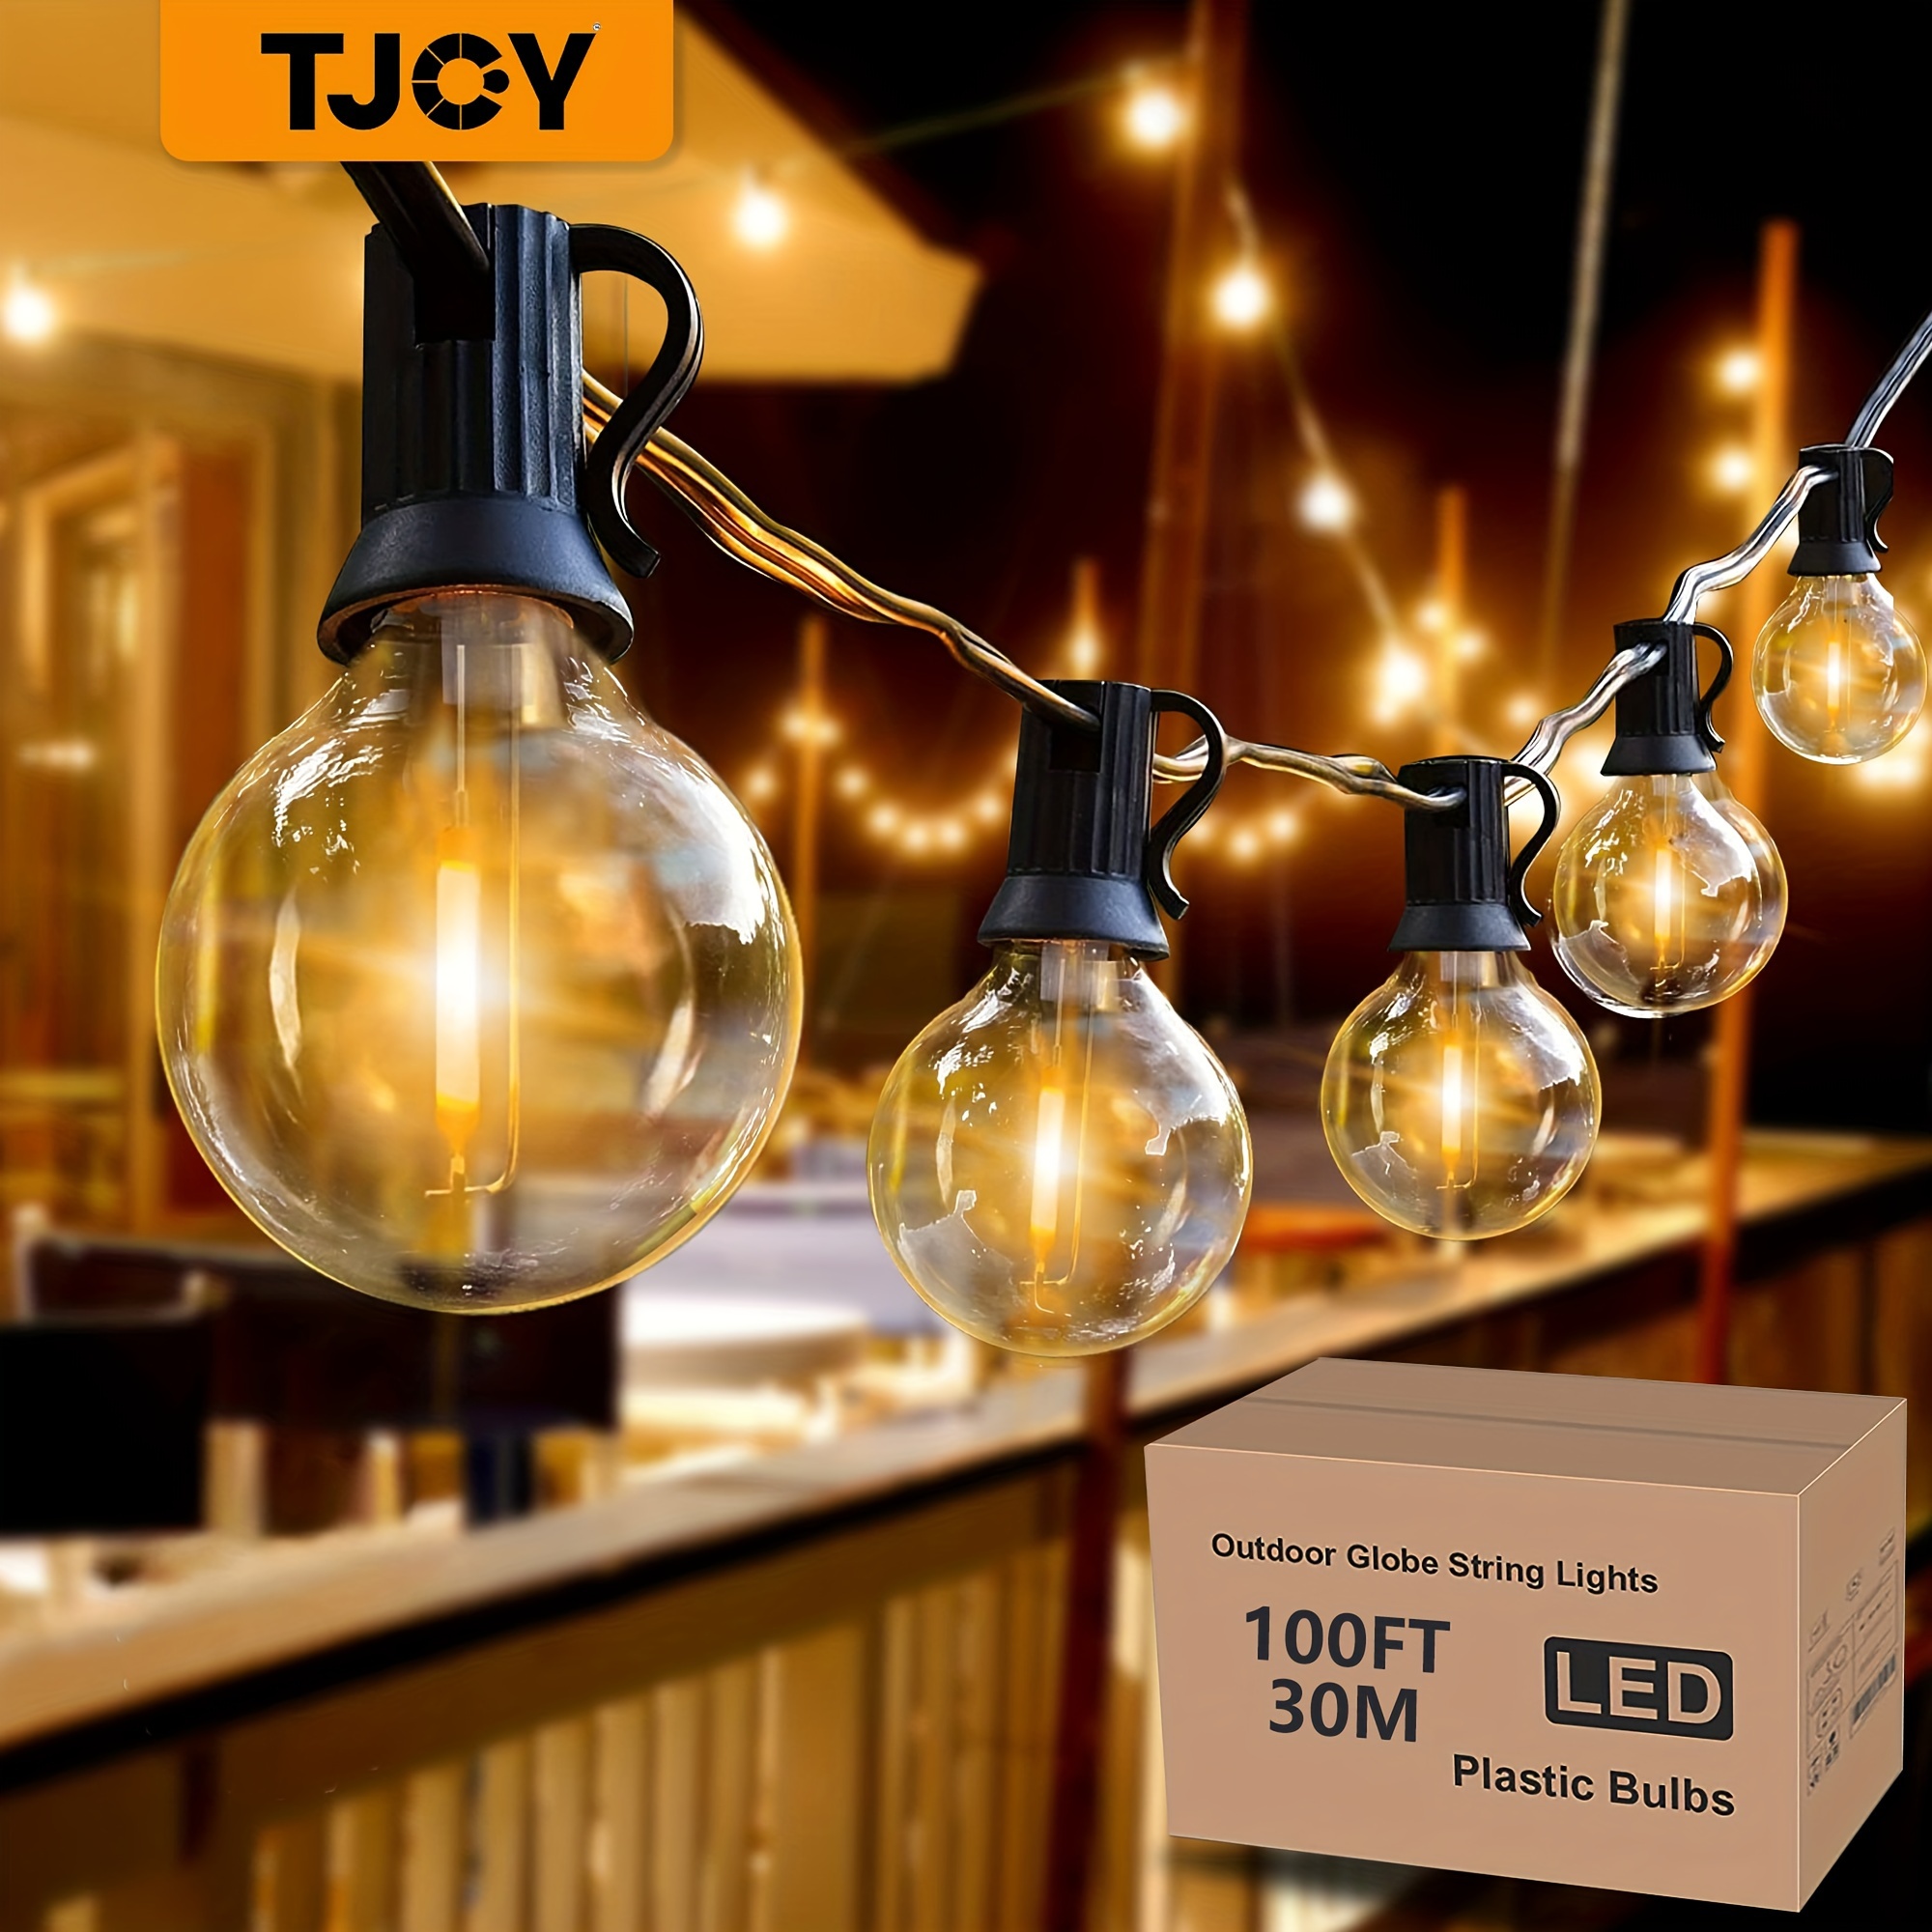 

100 Ft Outdoor String Lights, Shatterproof Globe Led Patio Lights With 51pcs Bulbs, Outdoor Hanging String G40 Light For Bistro, Cafe & Backyard Balcony, E12 Black, Connectable